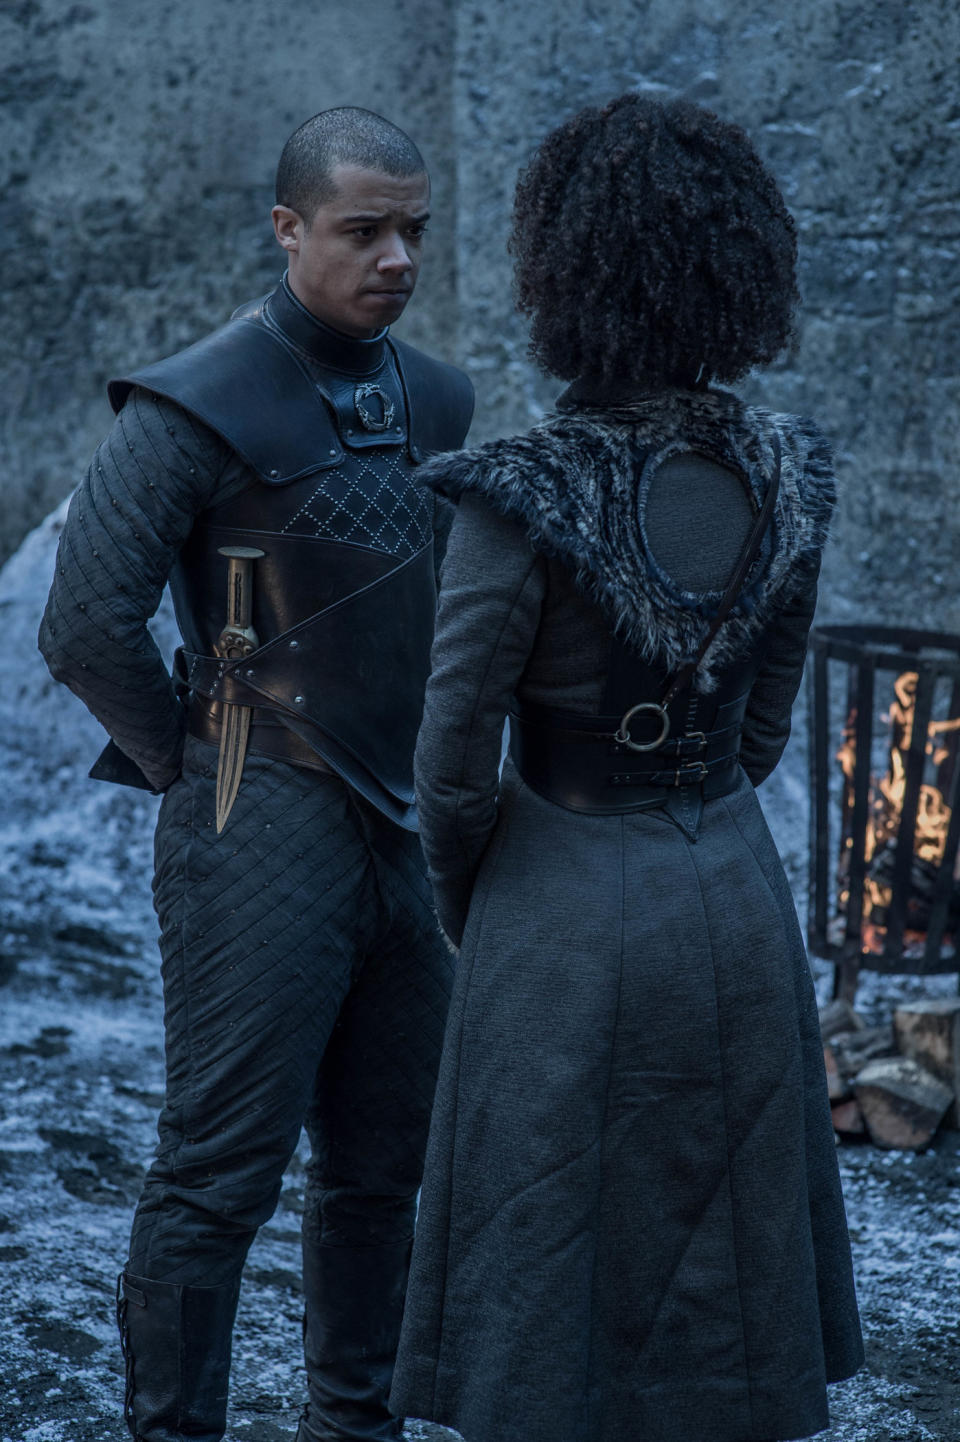 Jacob Anderson as Grey Worm and Nathalie Emmanuel as Missandei in <i>Game of Thrones</i>. (Photo: Helen Sloan/HBO)